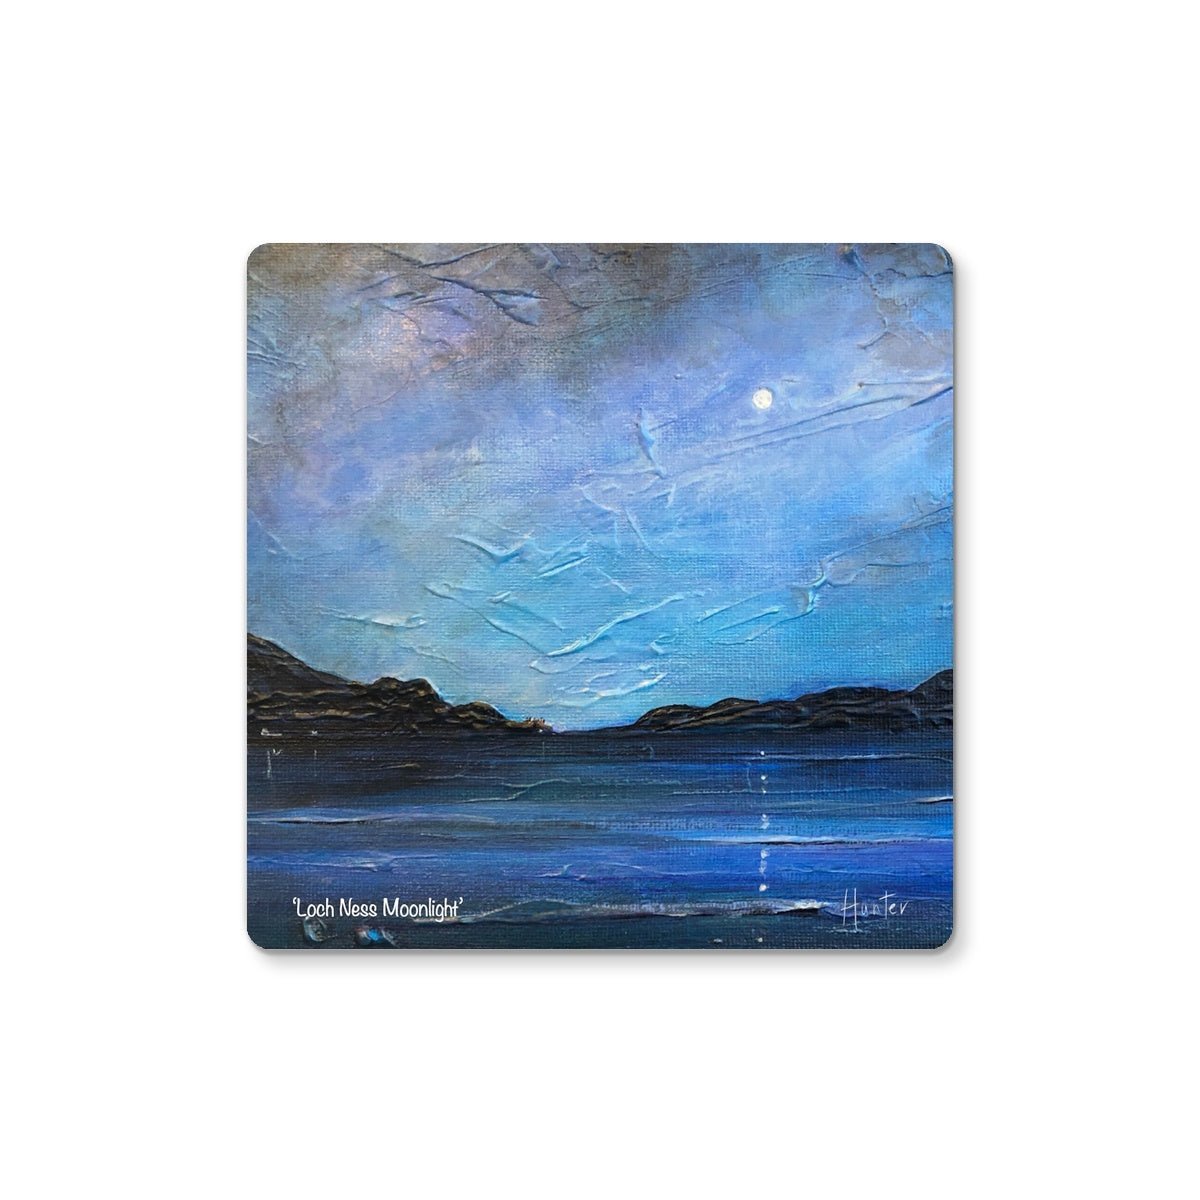 Loch Ness Moonlight Art Gifts Coaster-Coasters-Scottish Lochs & Mountains Art Gallery-4 Coasters-Paintings, Prints, Homeware, Art Gifts From Scotland By Scottish Artist Kevin Hunter